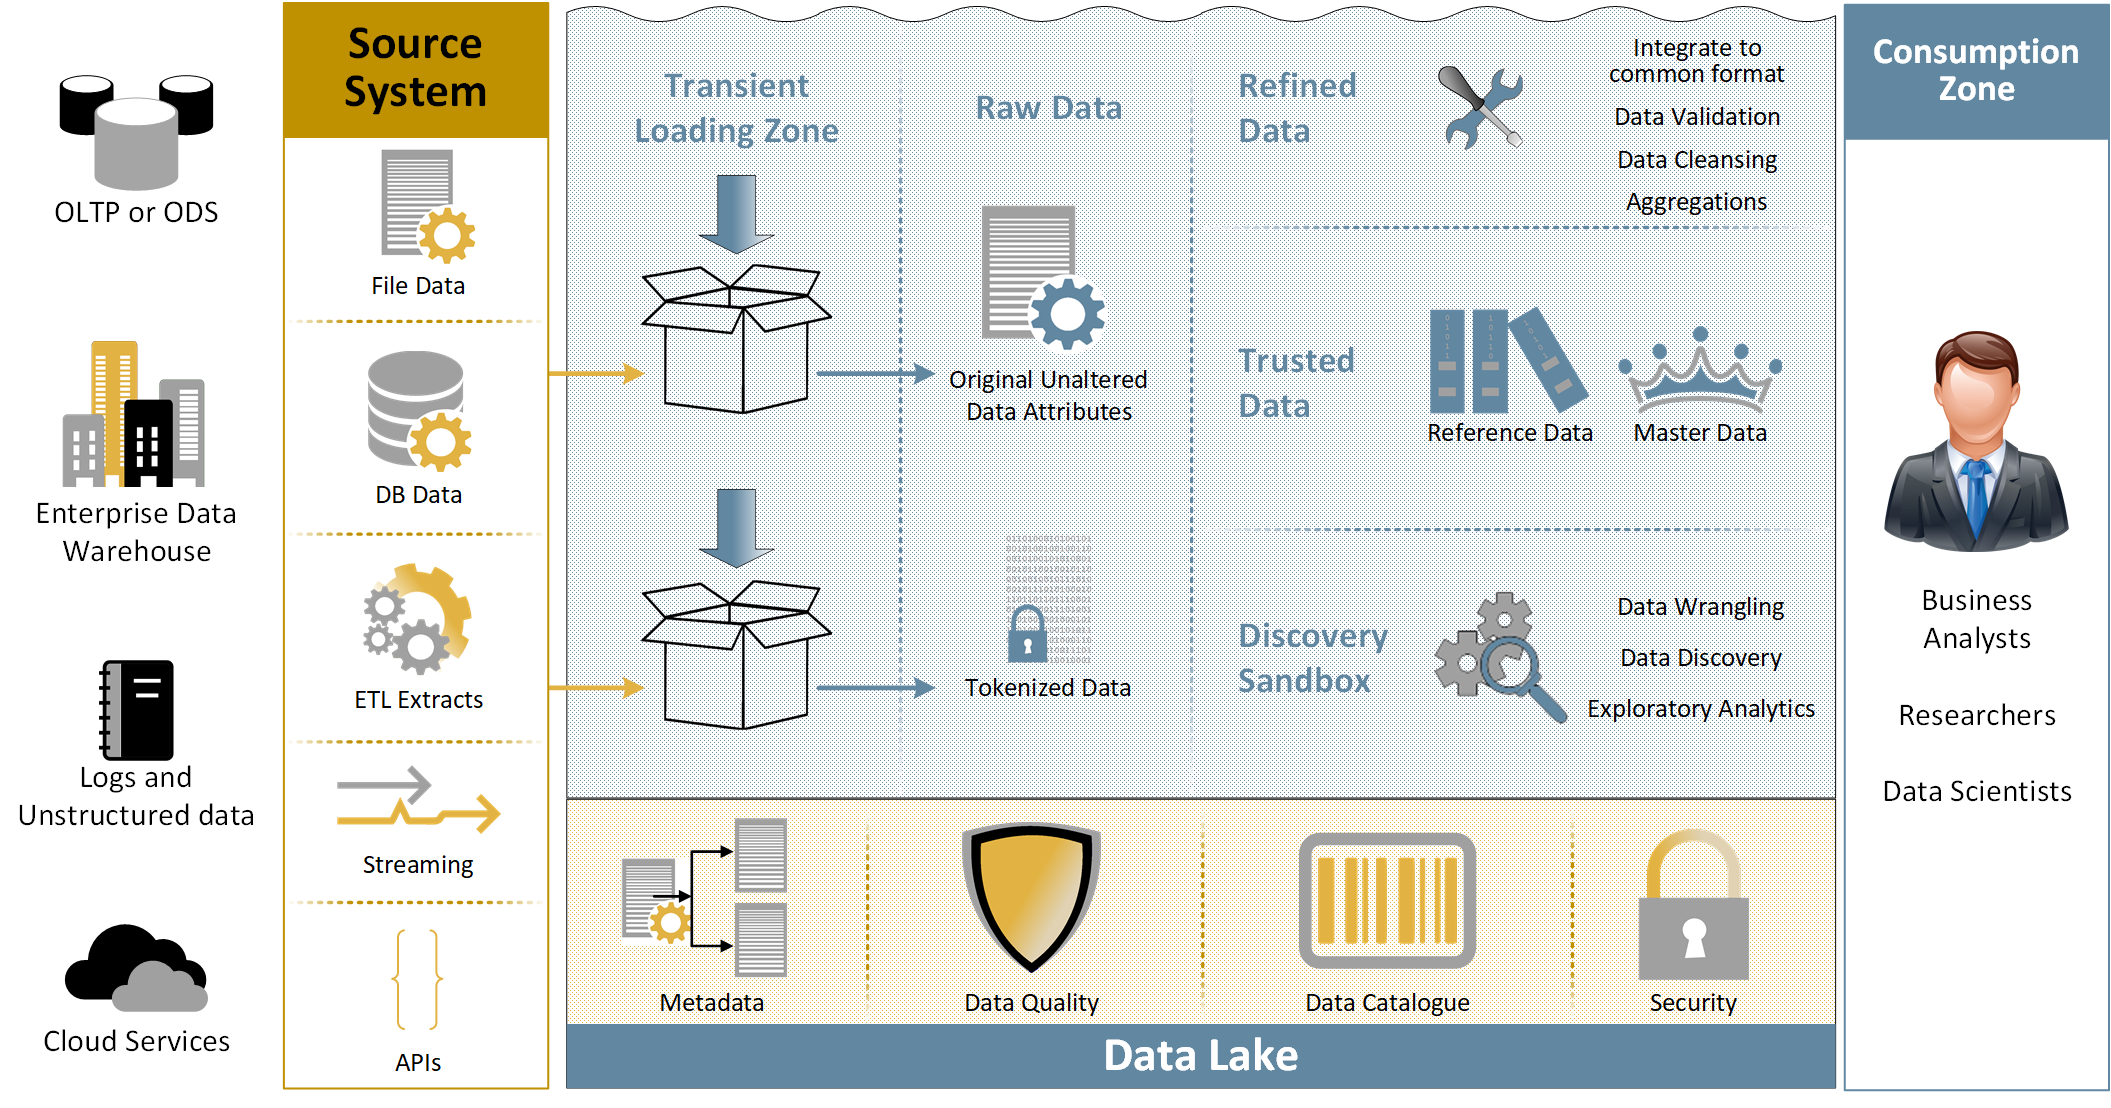 The collection of security related incident or event data gathered for analysis and consumption. The concept tabled, suggests a shared repository (data lake) that can host this traditional SIEM data along with other structured and unstructured data. All together, this data will comprise the source data for AI and machine learning integration to move towards the ideas of ‘self-healing network’ with the advent of AIOps and (next gen) SOAR. Shared data will also provide current individual tool access as tools/systems evolve. 